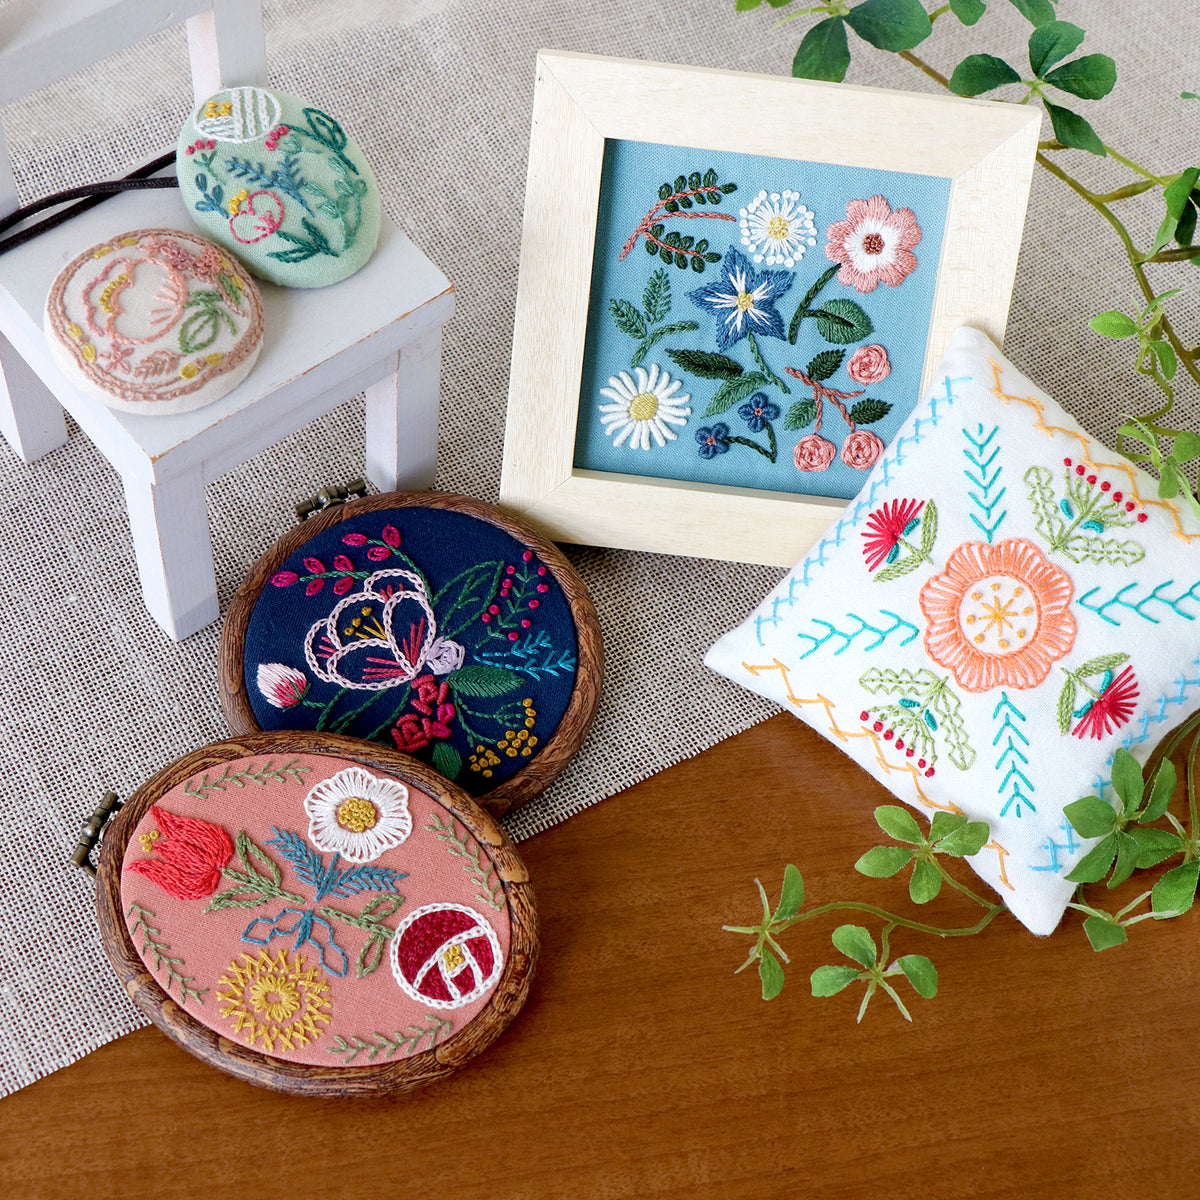 Garden Party Embroidery Lessons Sampler Kit